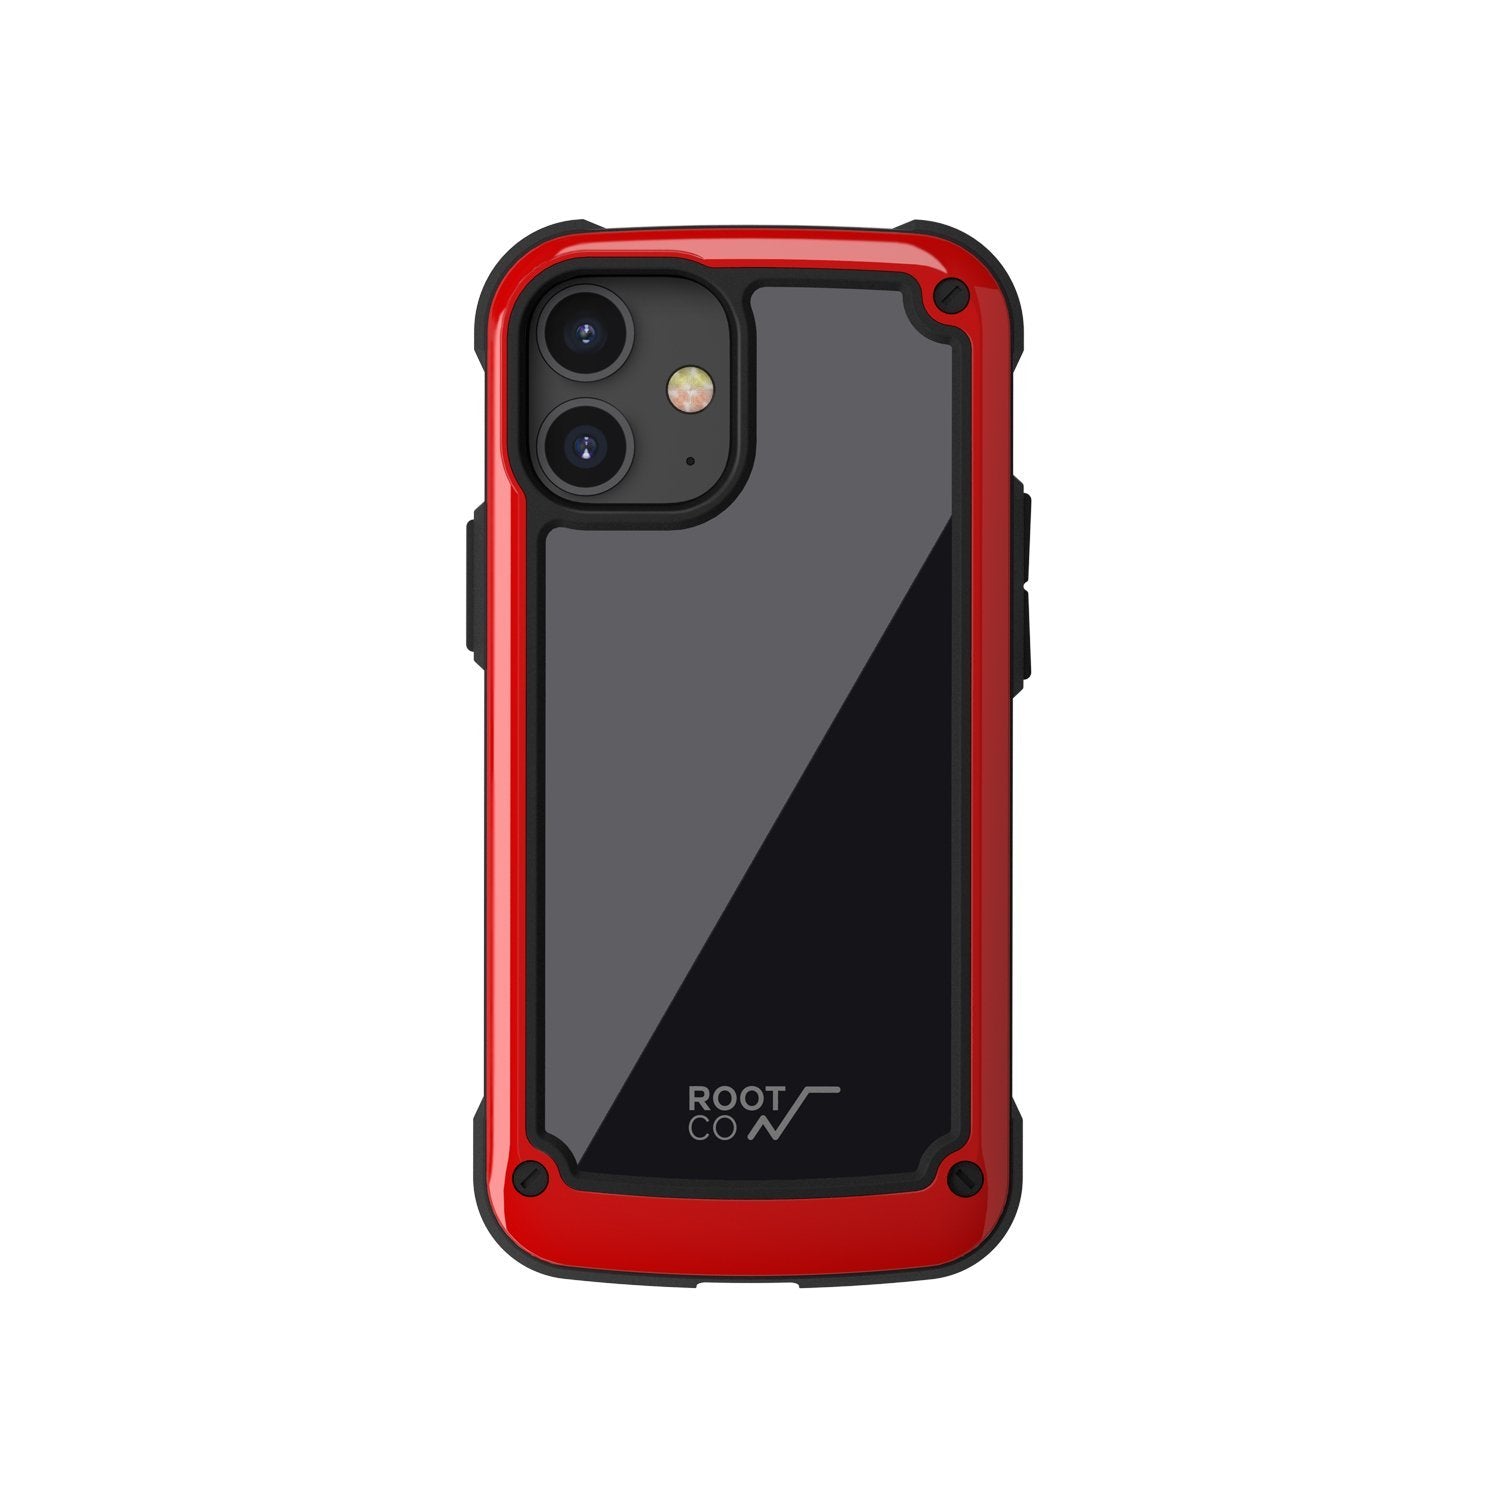 ROOT CO. Gravity Shock Resist Tough & Basic Case for iPhone 12 mini 5.4"(2020), Red Default ROOT CO. 